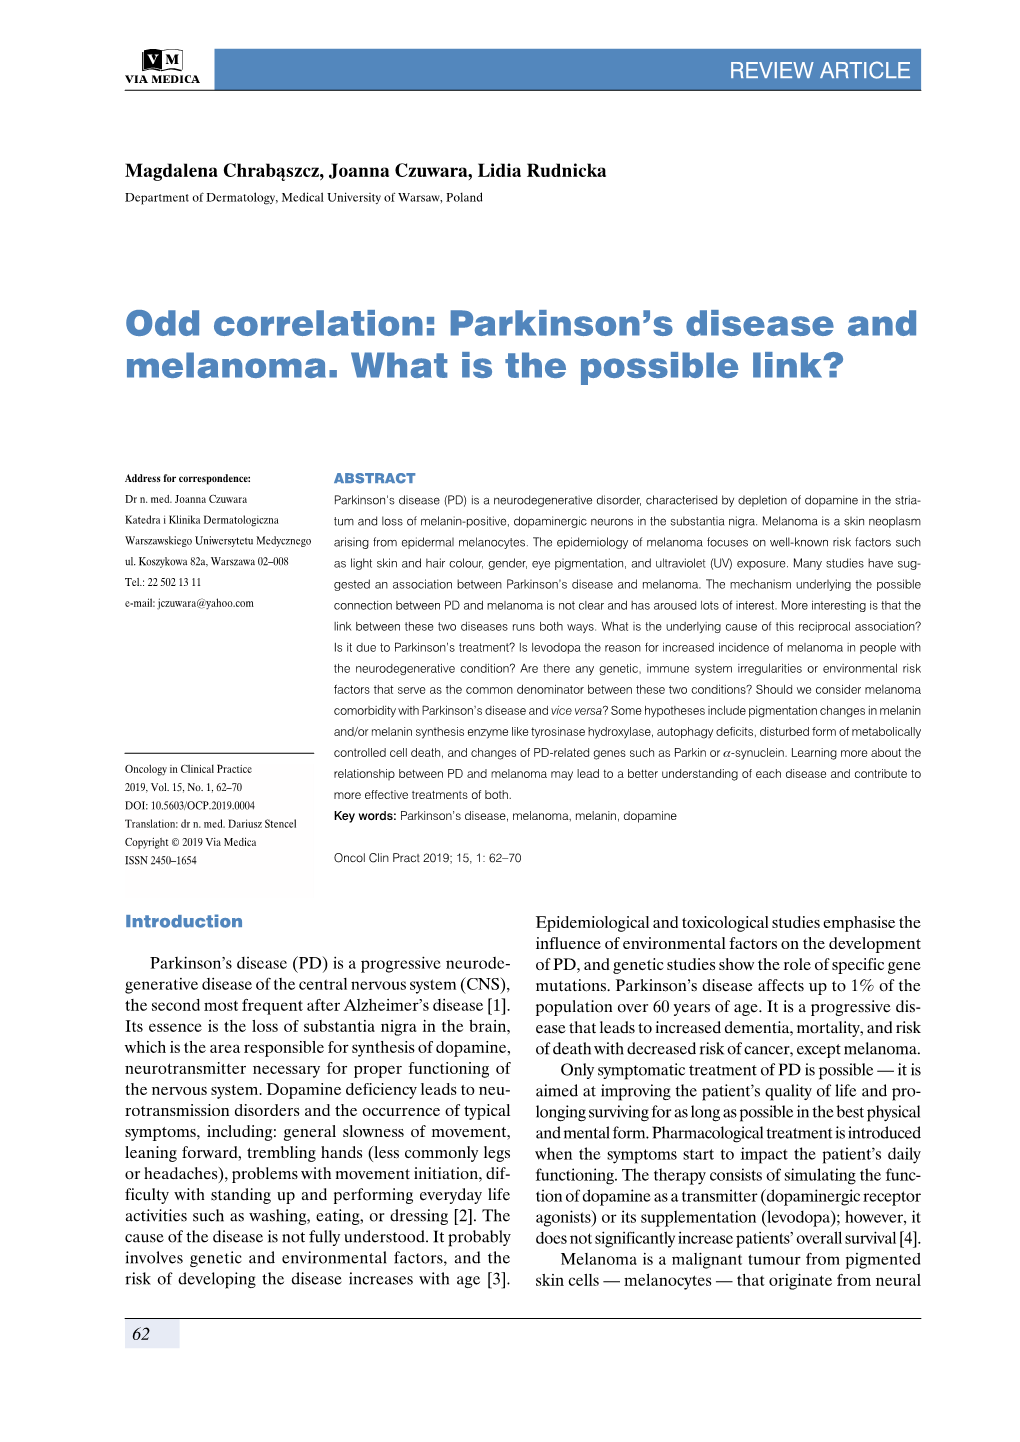 Parkinson's Disease and Melanoma. What Is the Possible Link?